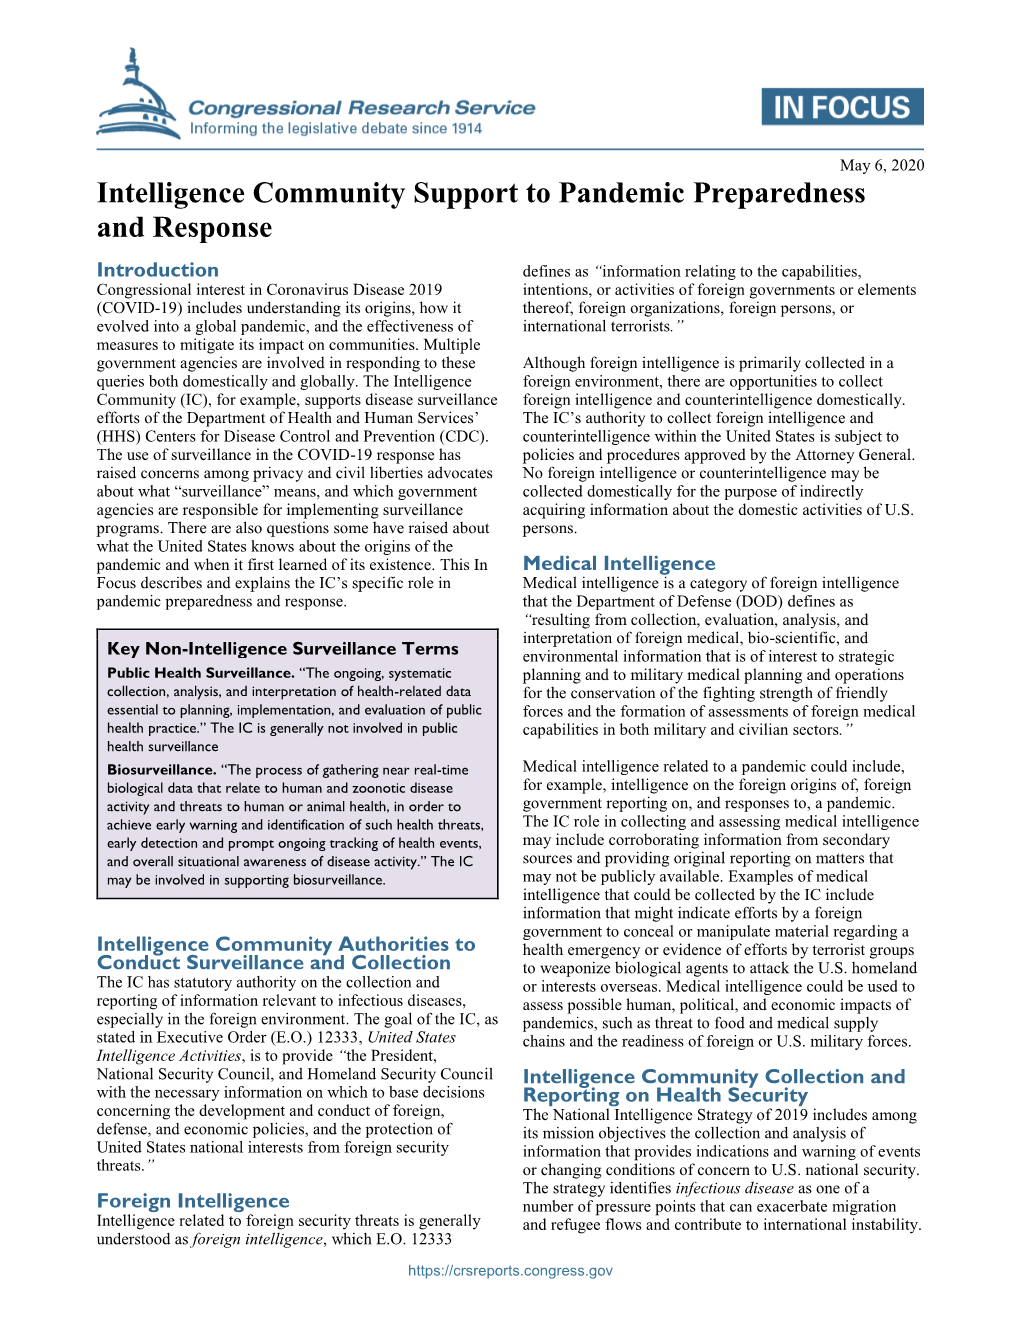 Intelligence Community Support to Pandemic Preparedness and Response